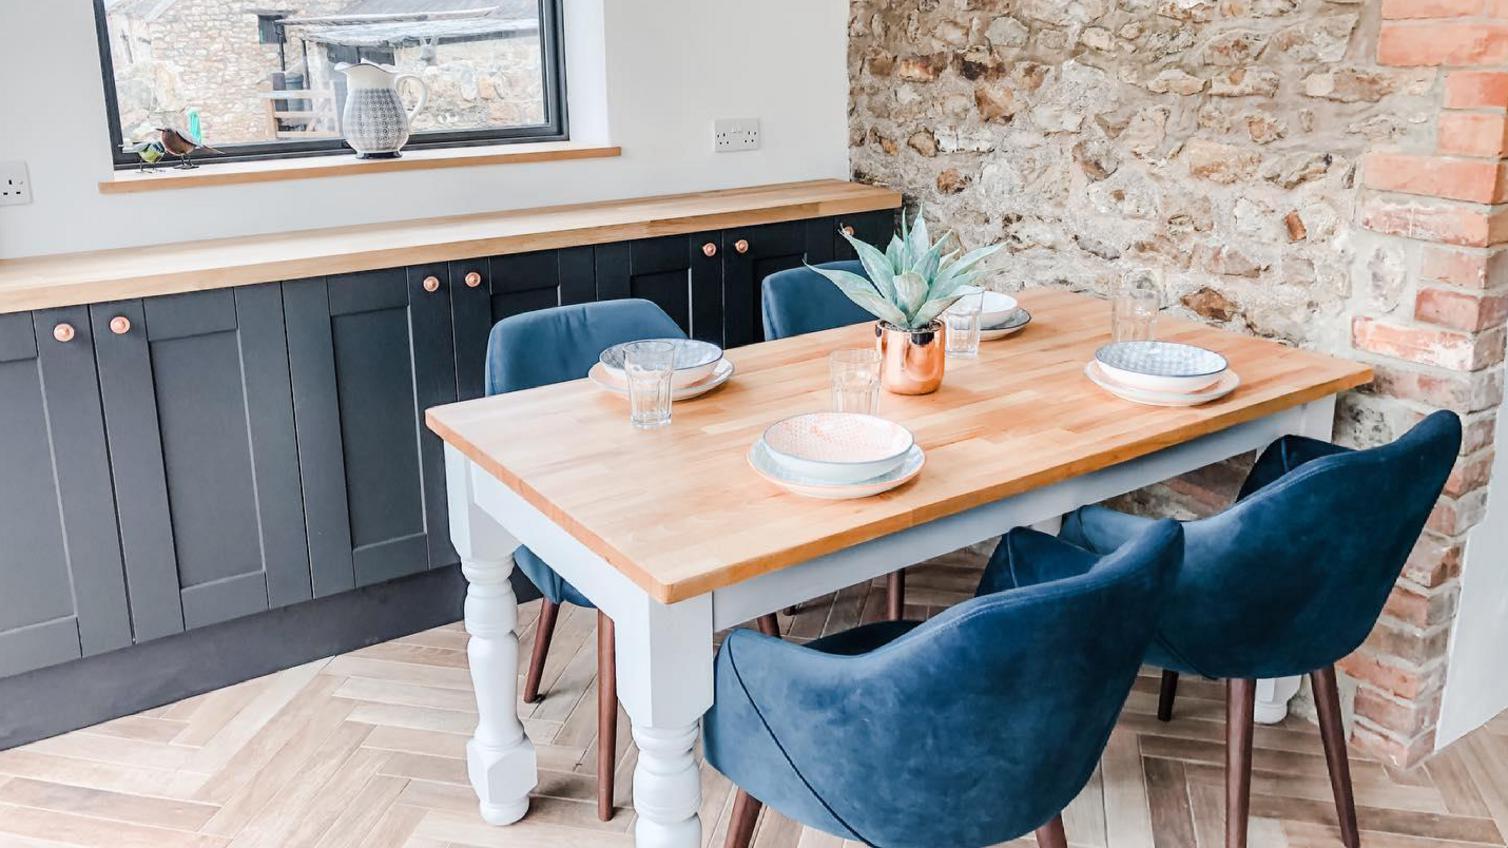 Farmhouse dining room idea with an oak table, blue velvet chairs, exposed brick wall, and navy shaker base cupboards.